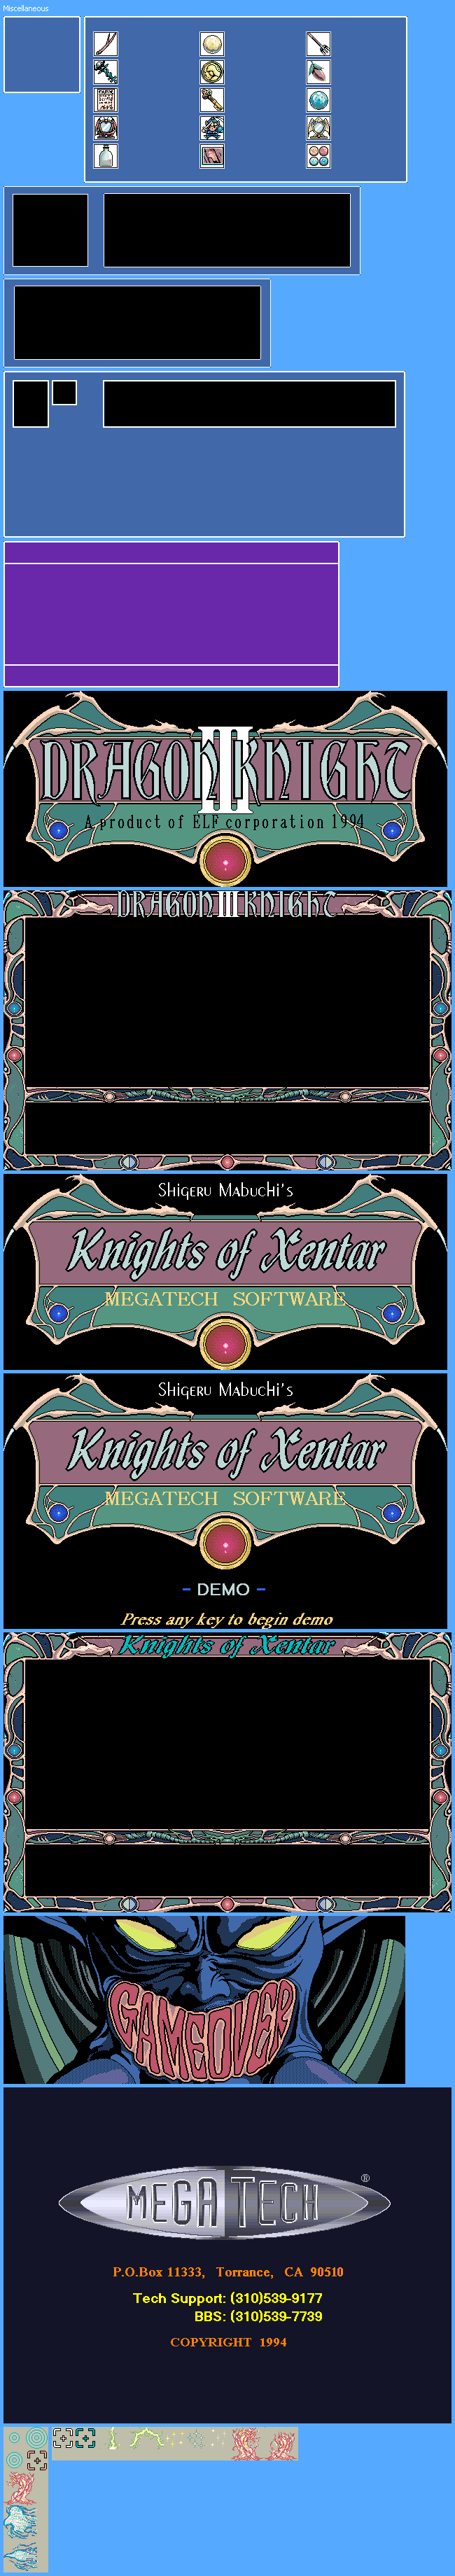 Knights of Xentar - Miscellaneous